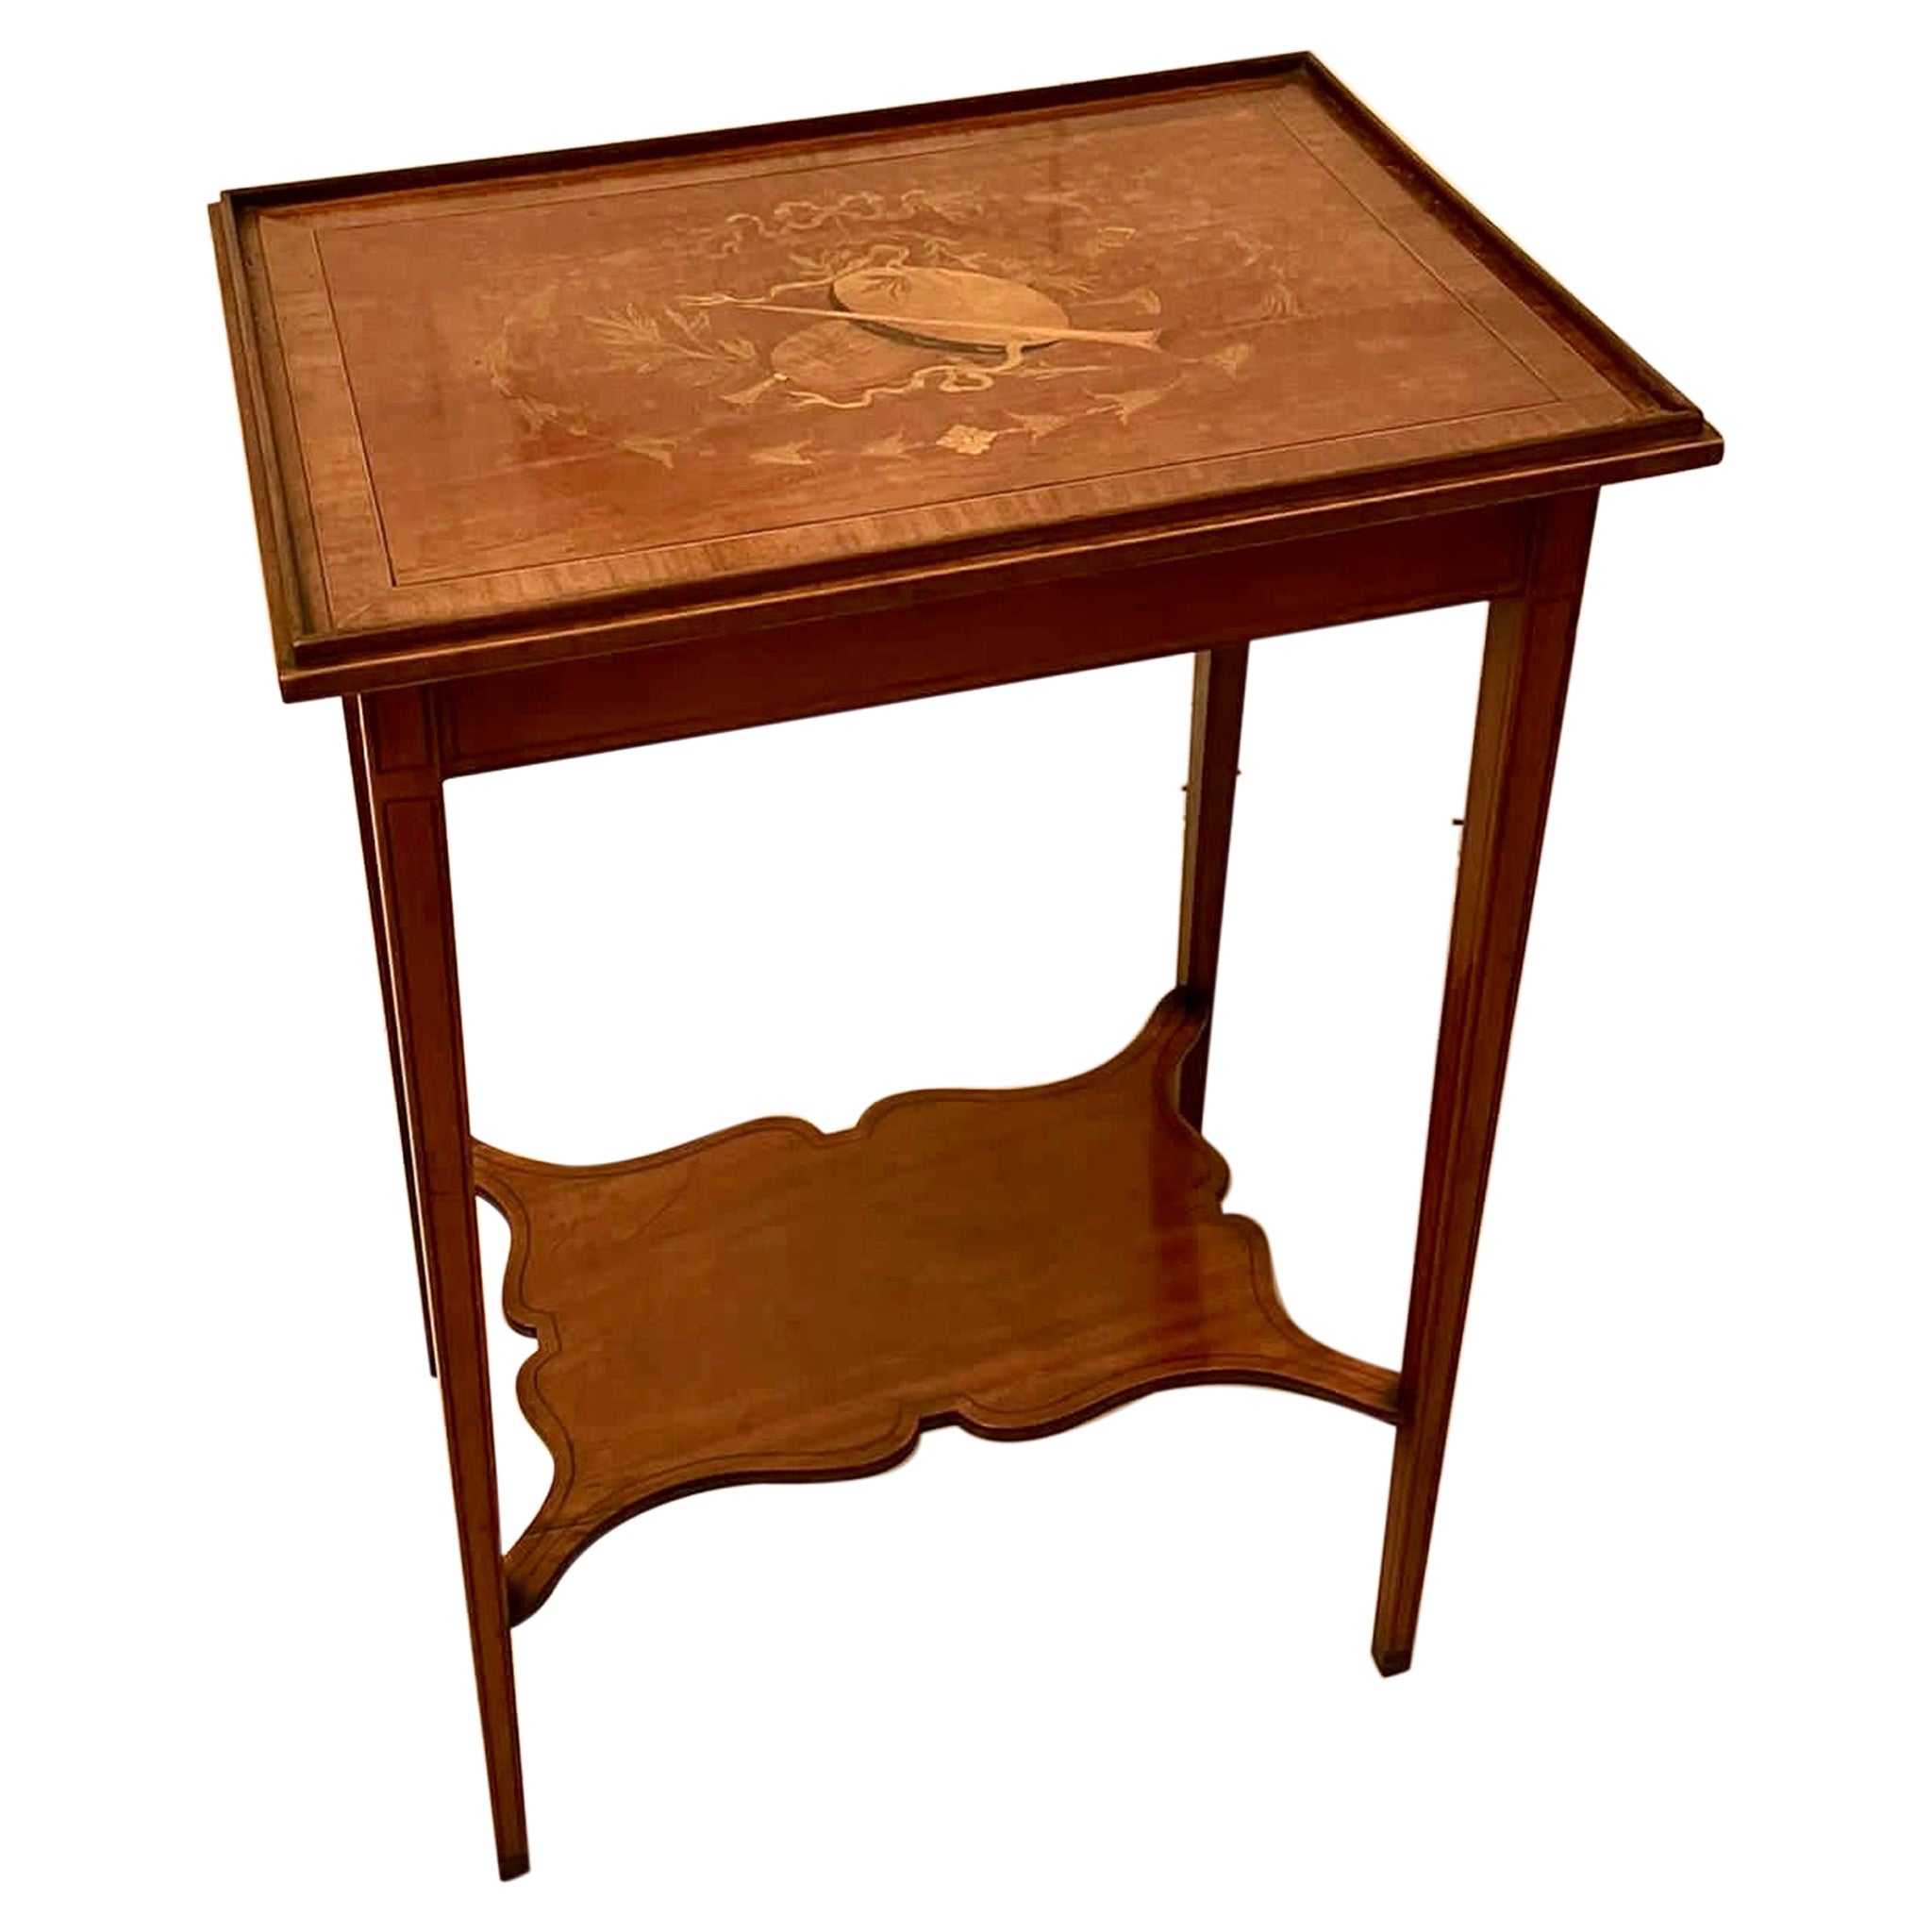 Fine Quality Antique Edwardian Satinwood Inlaid Lamp Table For Sale